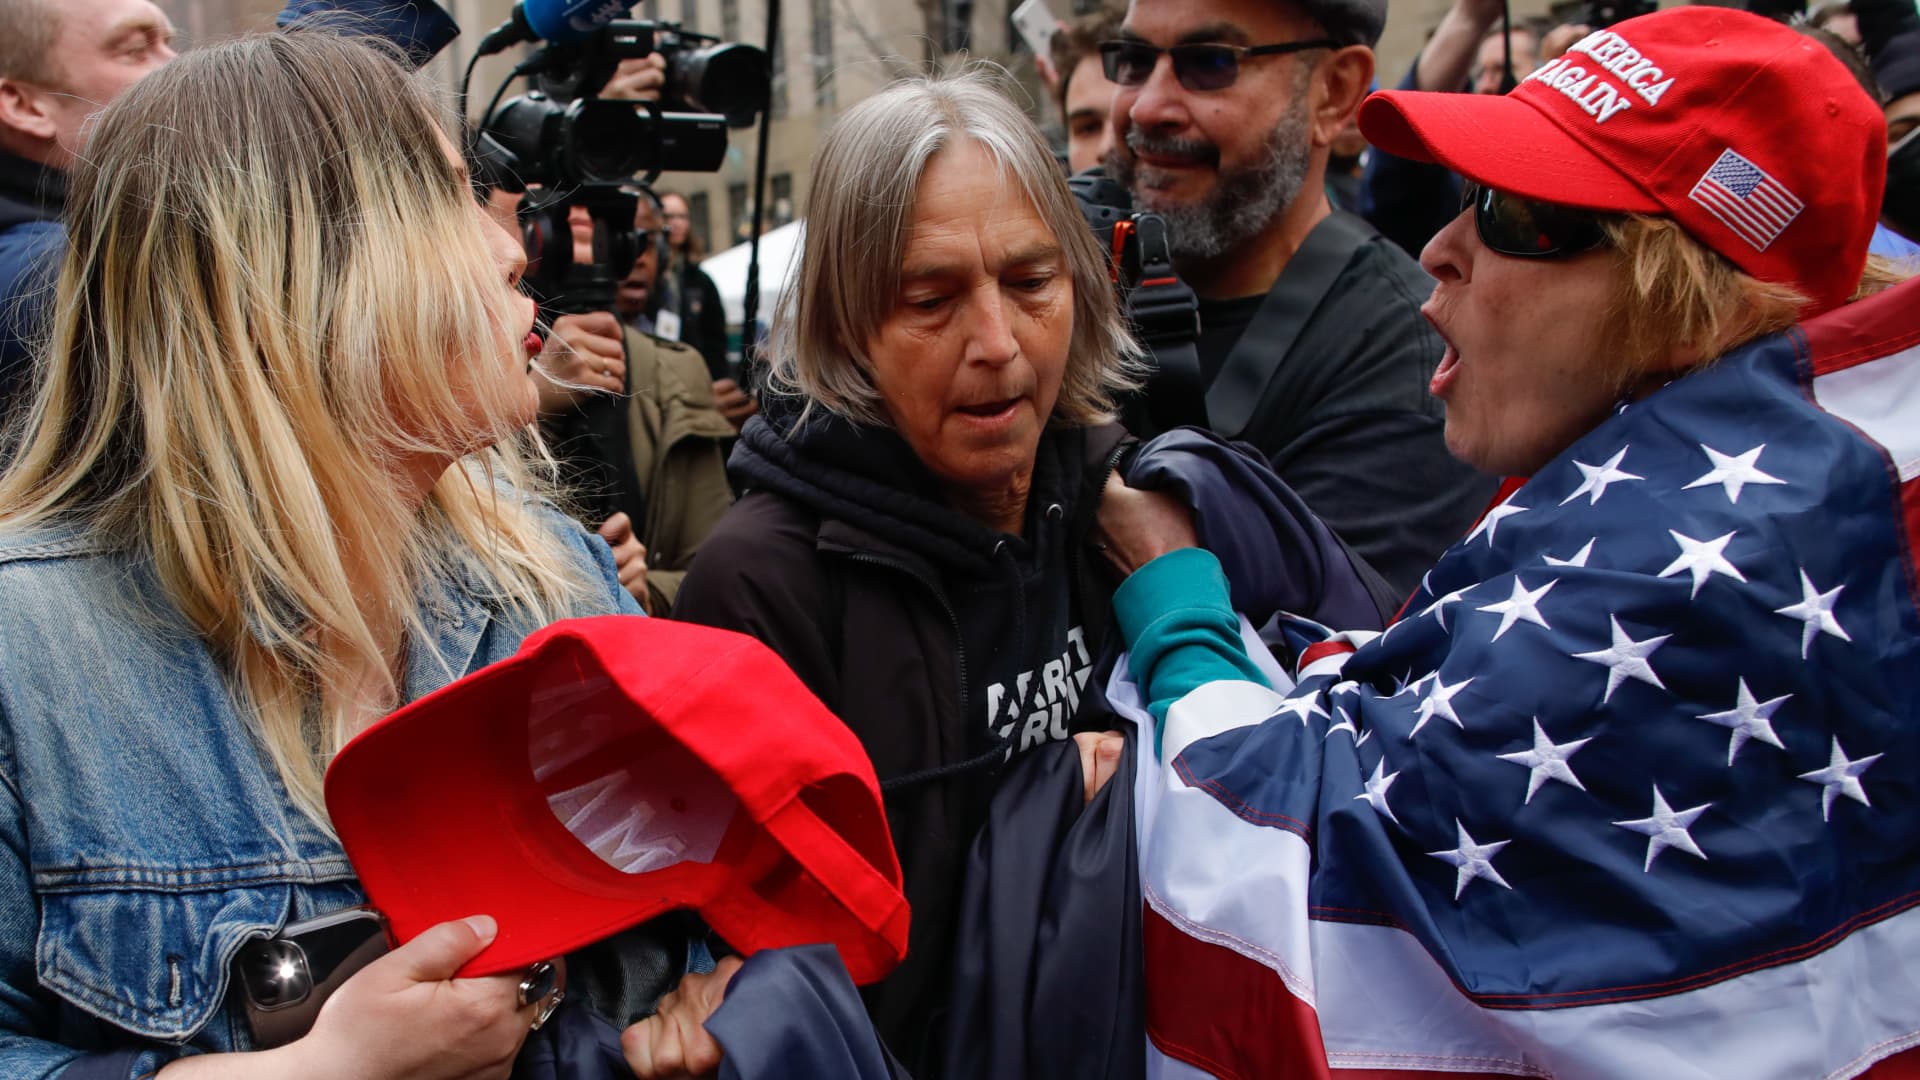 Trump supporters argues with an Anti-Trump protester (C) after they removed an anti-Trump banner from her outside the Manhattan Criminal Courthouse on April 04, 2023 in New York City.